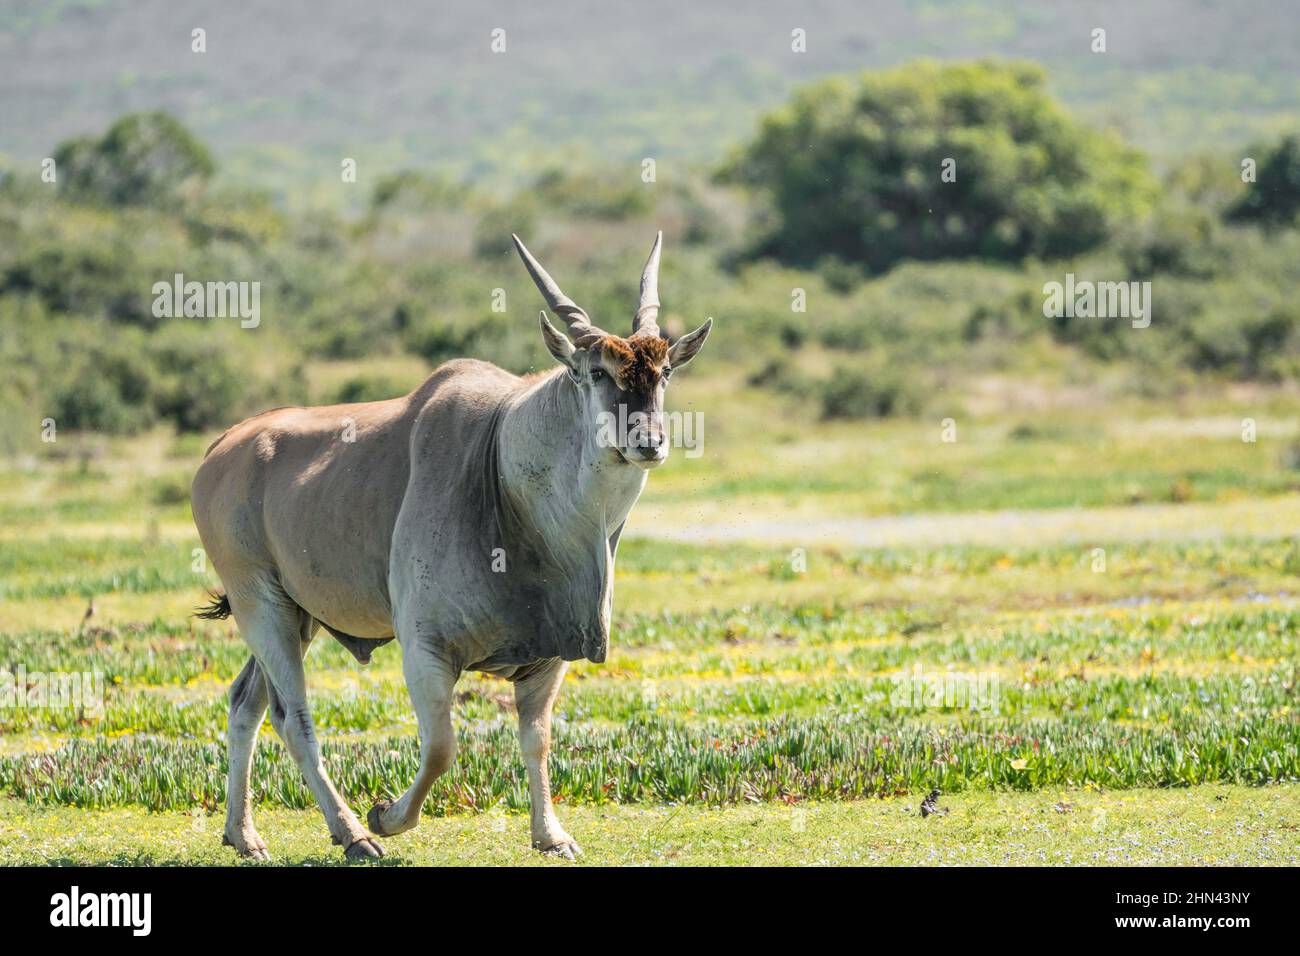 common Eland (Taurotragus oryx), southern Eland, Eland antelope wild in De Hoop nature reserve, Western Cape, South Africa Stock Photo